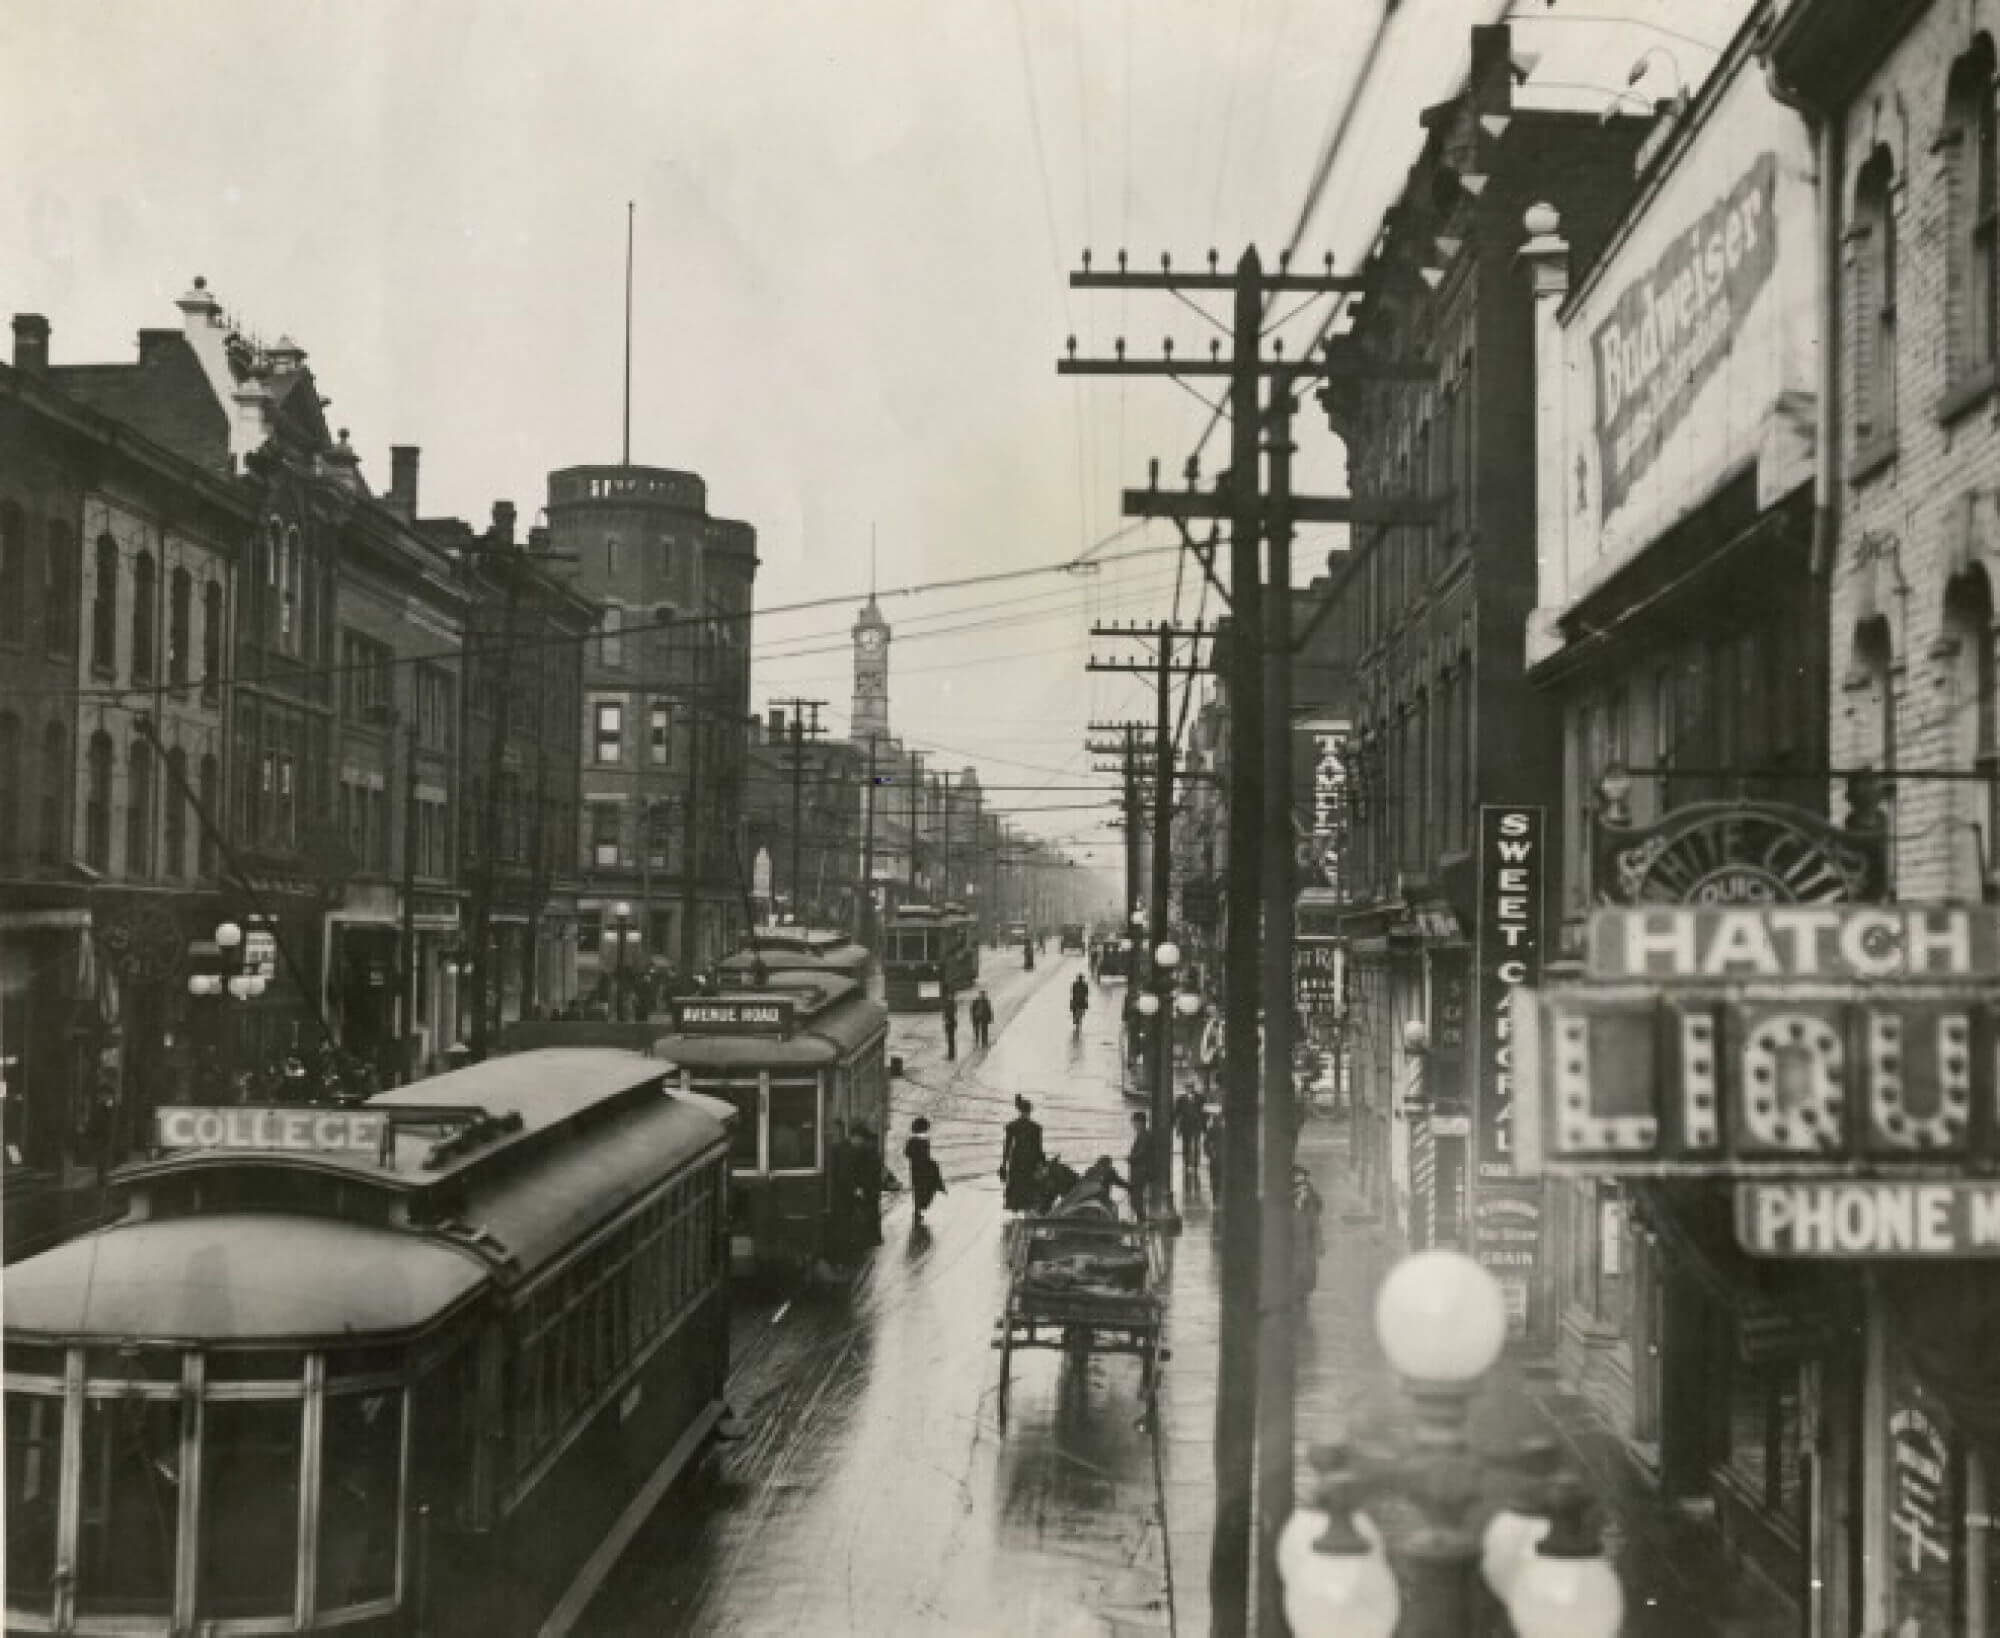 Black and white image of Yonge St from the vantage point of looking north from Granby St. Buildings of various architectural styles and electrical poles line the streets. Several of the buildings have electric signs hanging from the storefronts. Several streetcars are on the road, along with a horse-drawn carriage.